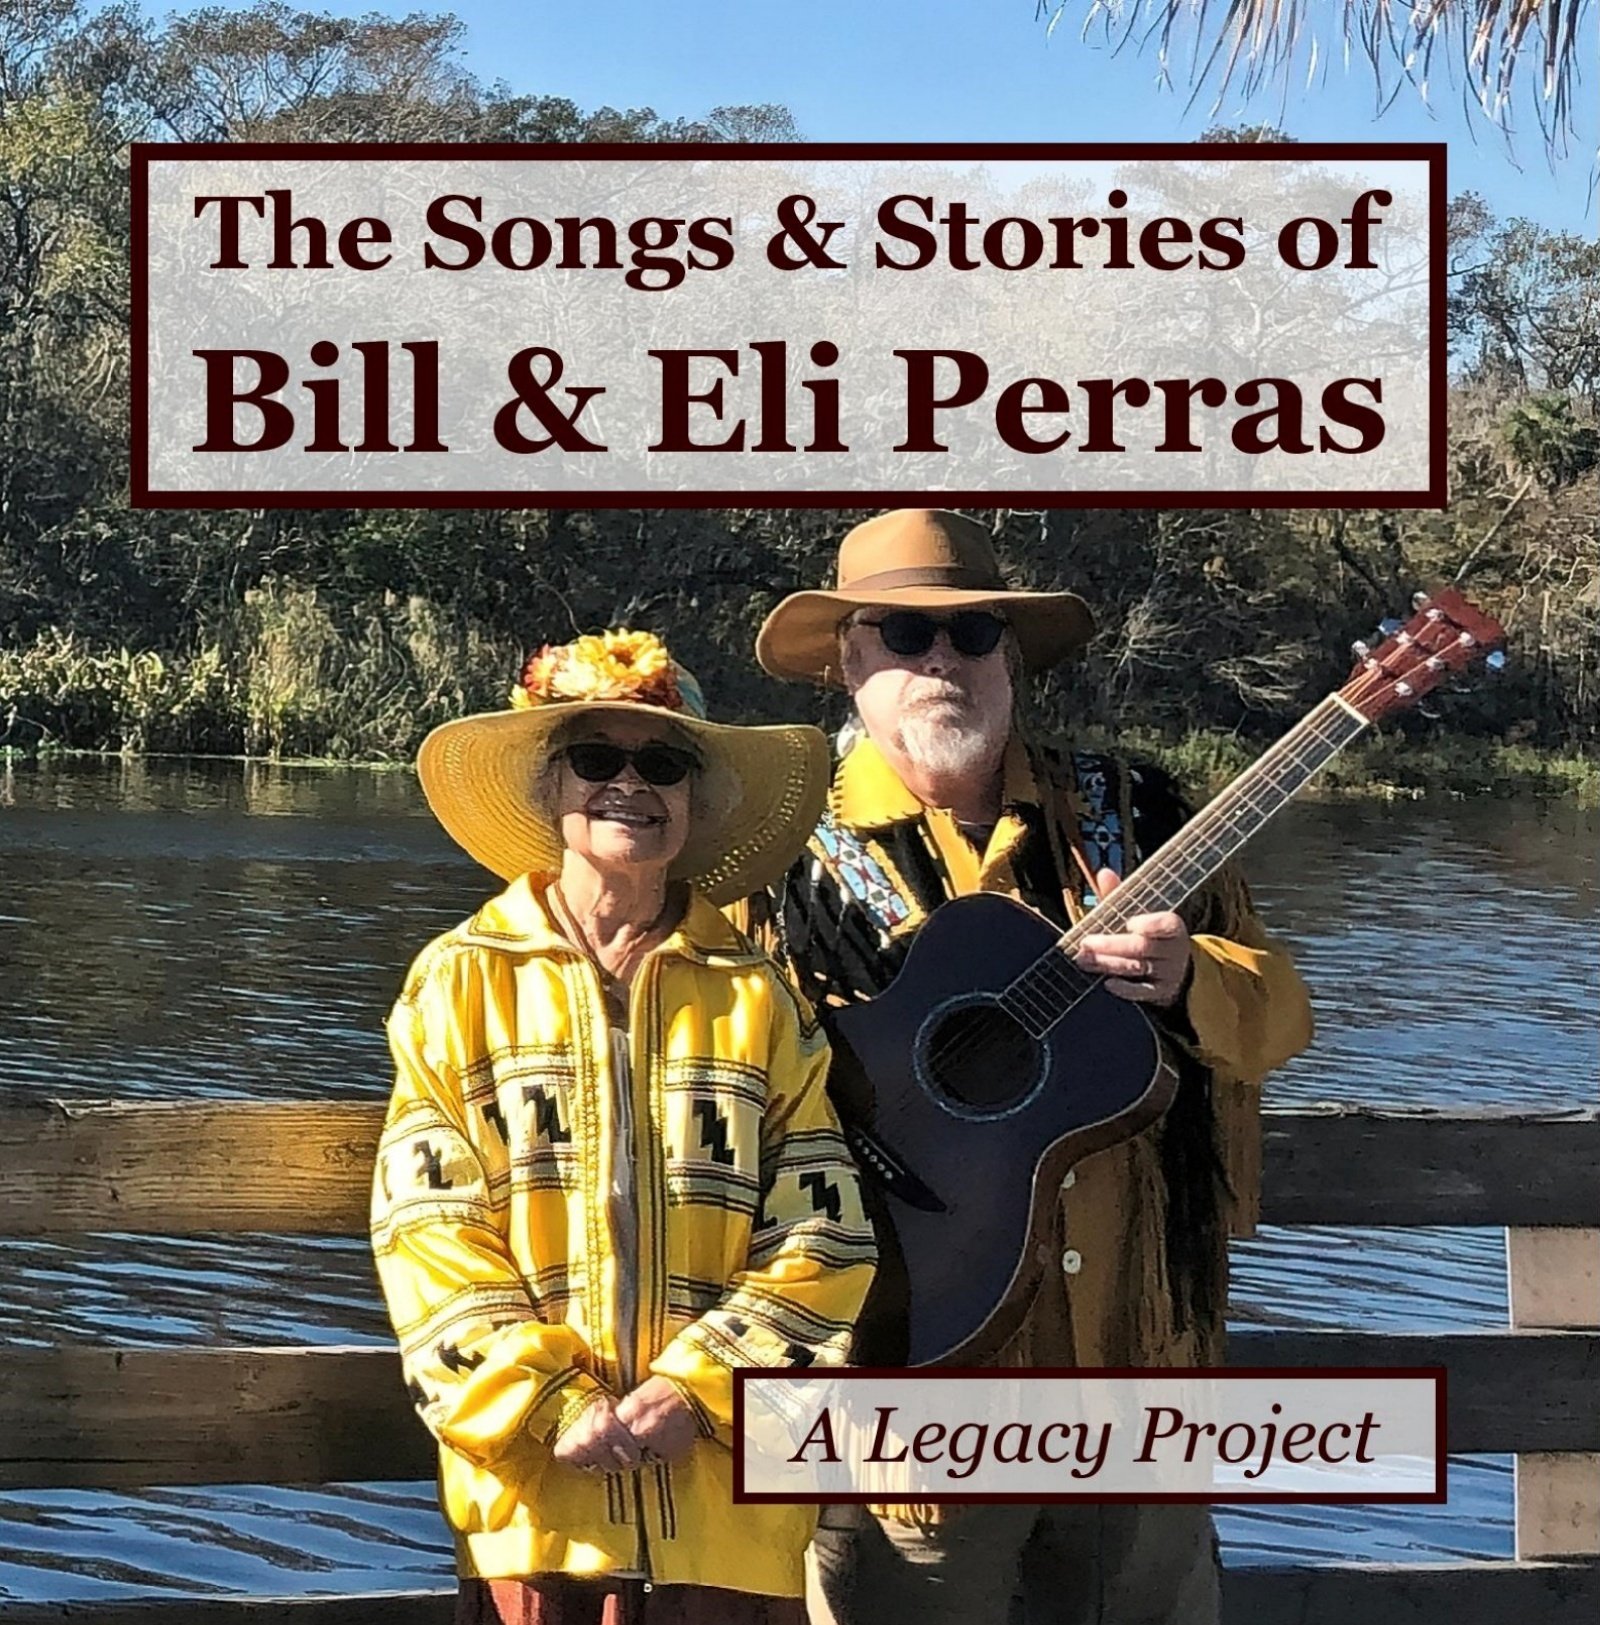 CD ONLY - THE SONGS AND STORIES OF BILL & ELI PERRAS - A Legacy Project